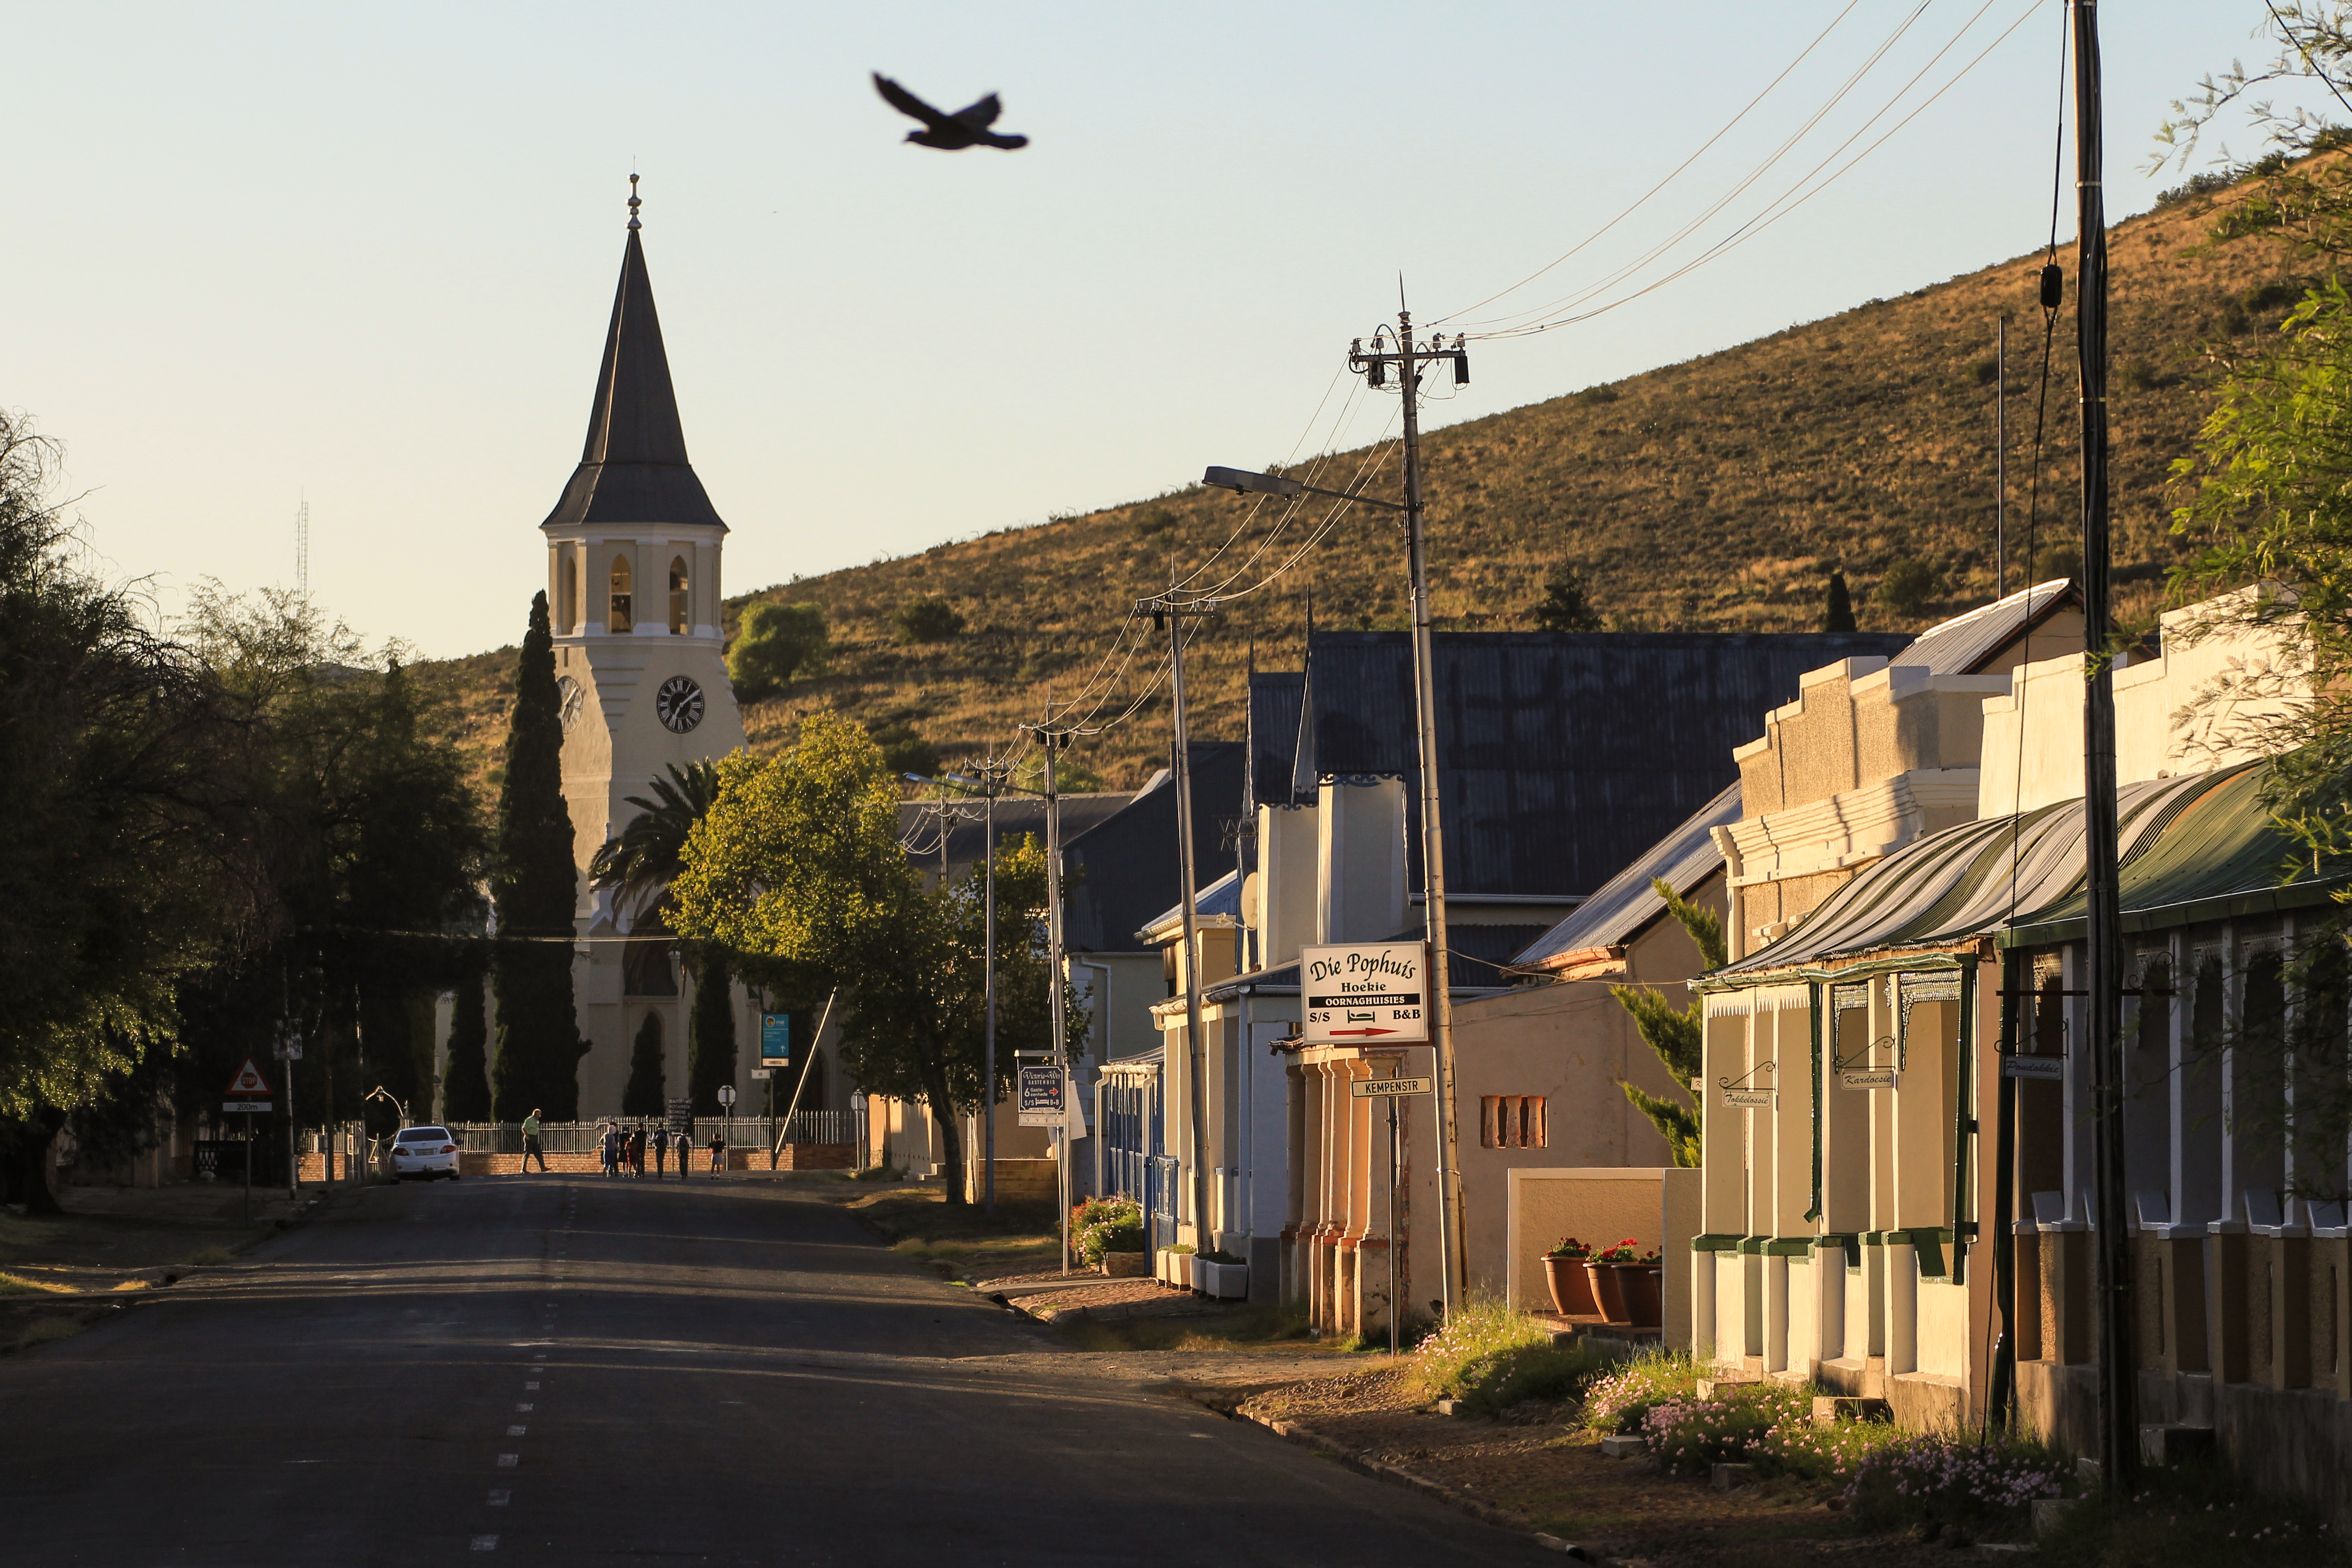  Modern-day Victoria West at dawn – not much different than it was a century ago. Image: Chris Marais